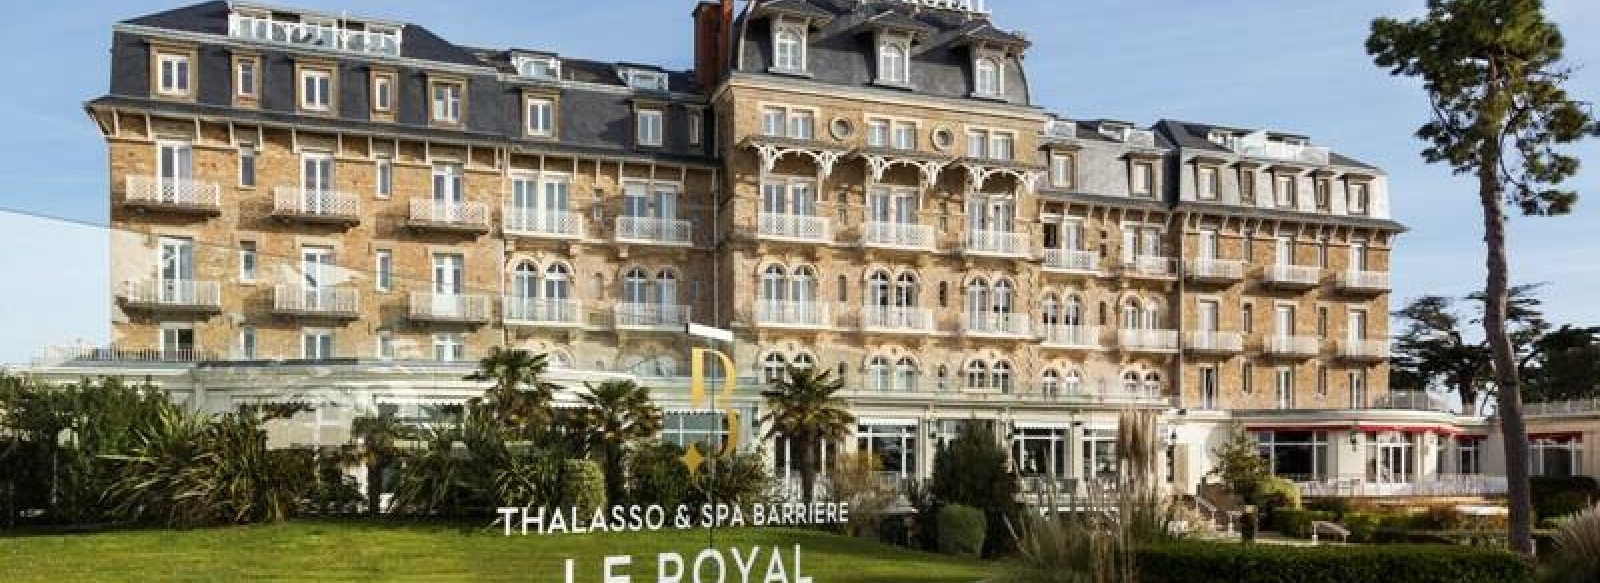 Hotel - Barriere Le Royal